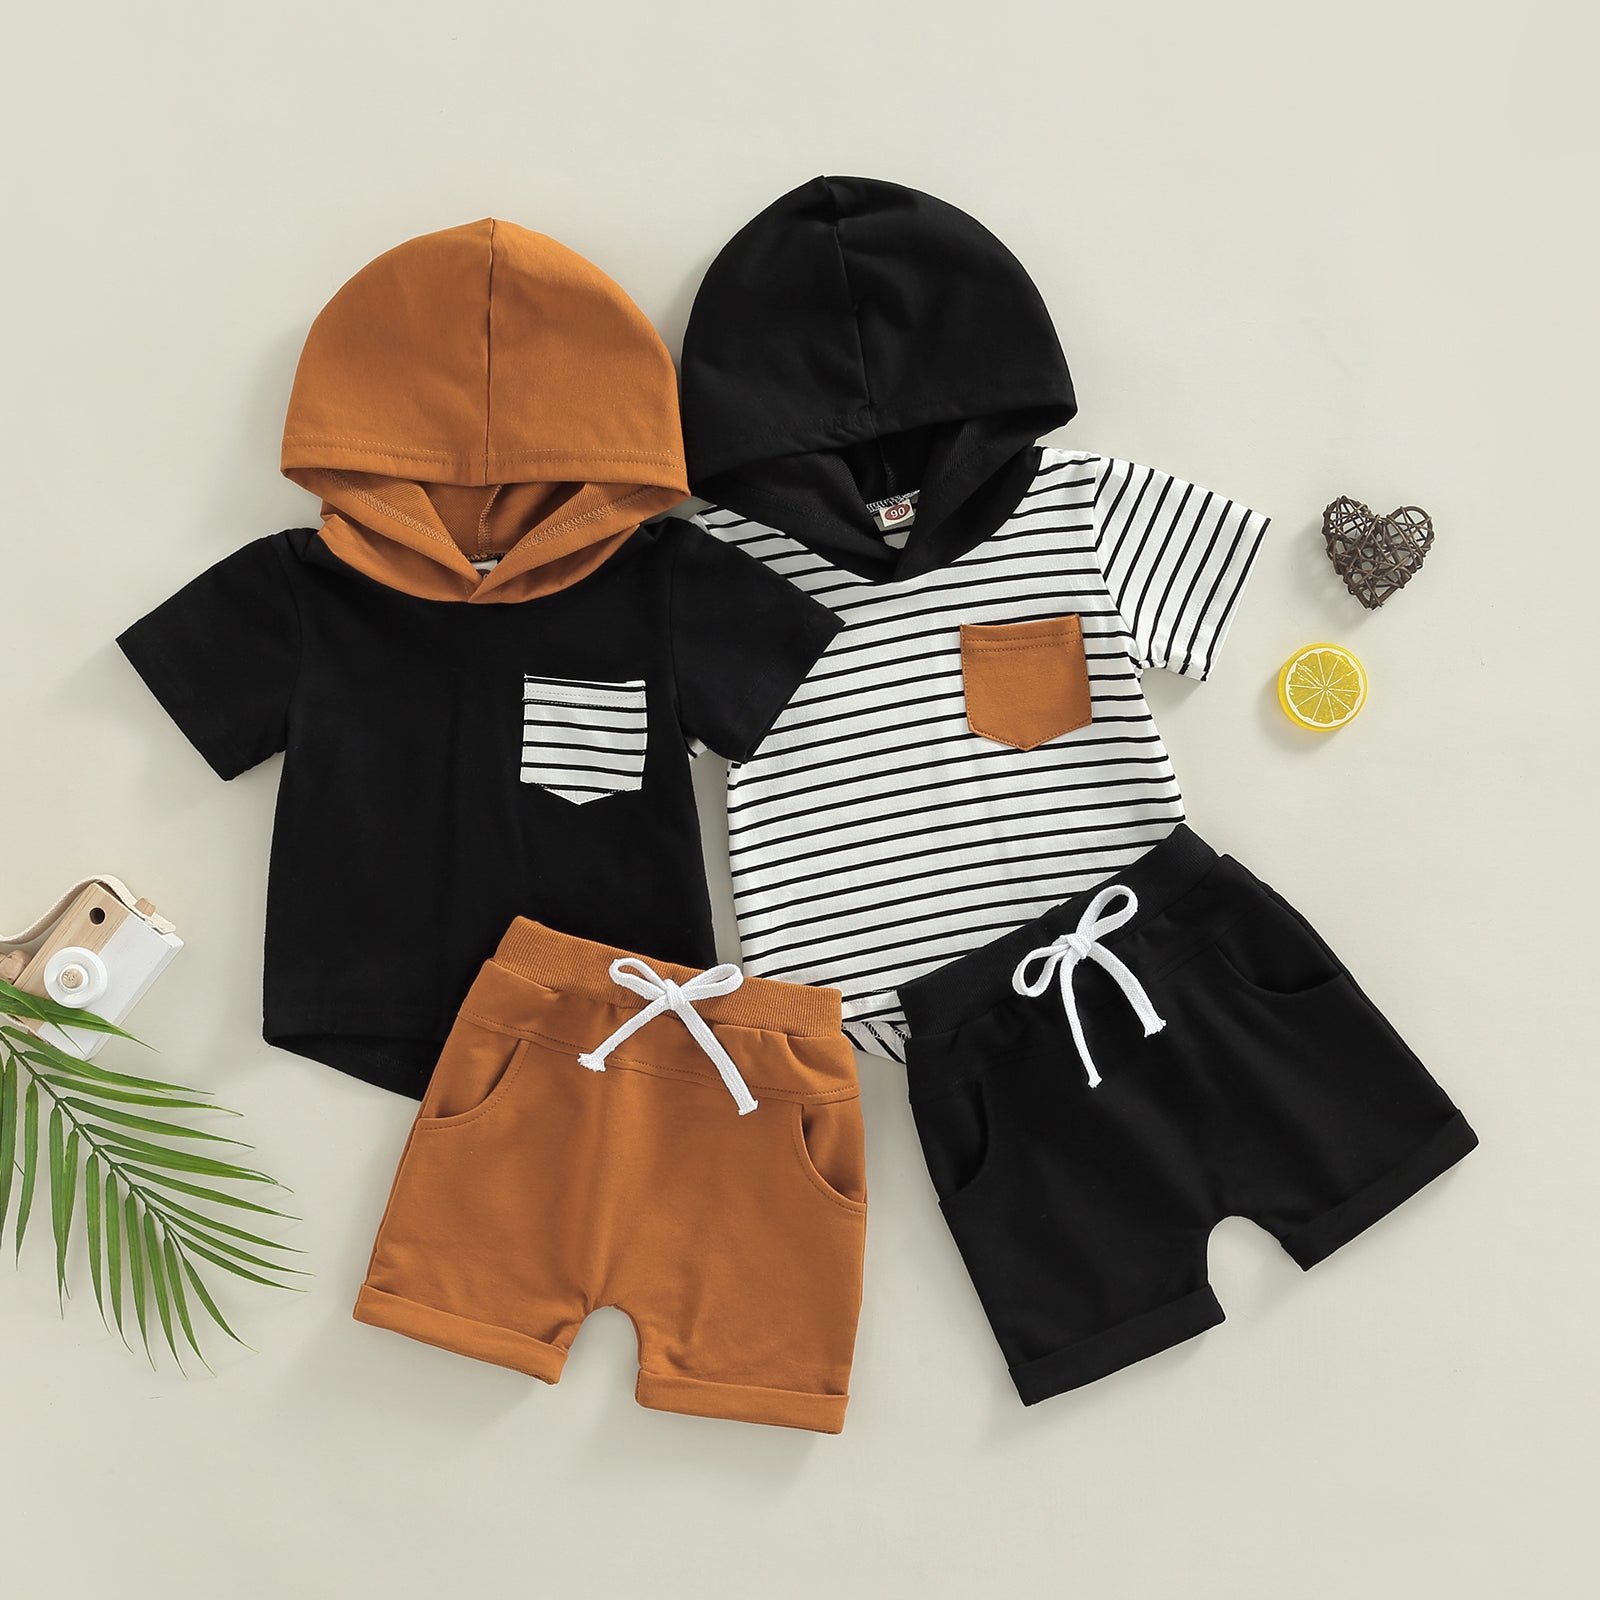 Boys Autumn And Winter Sweatshirt New Childrens Clothing Thick Warm Hooded  Pullover appropriate height 170cm colour C1140 black